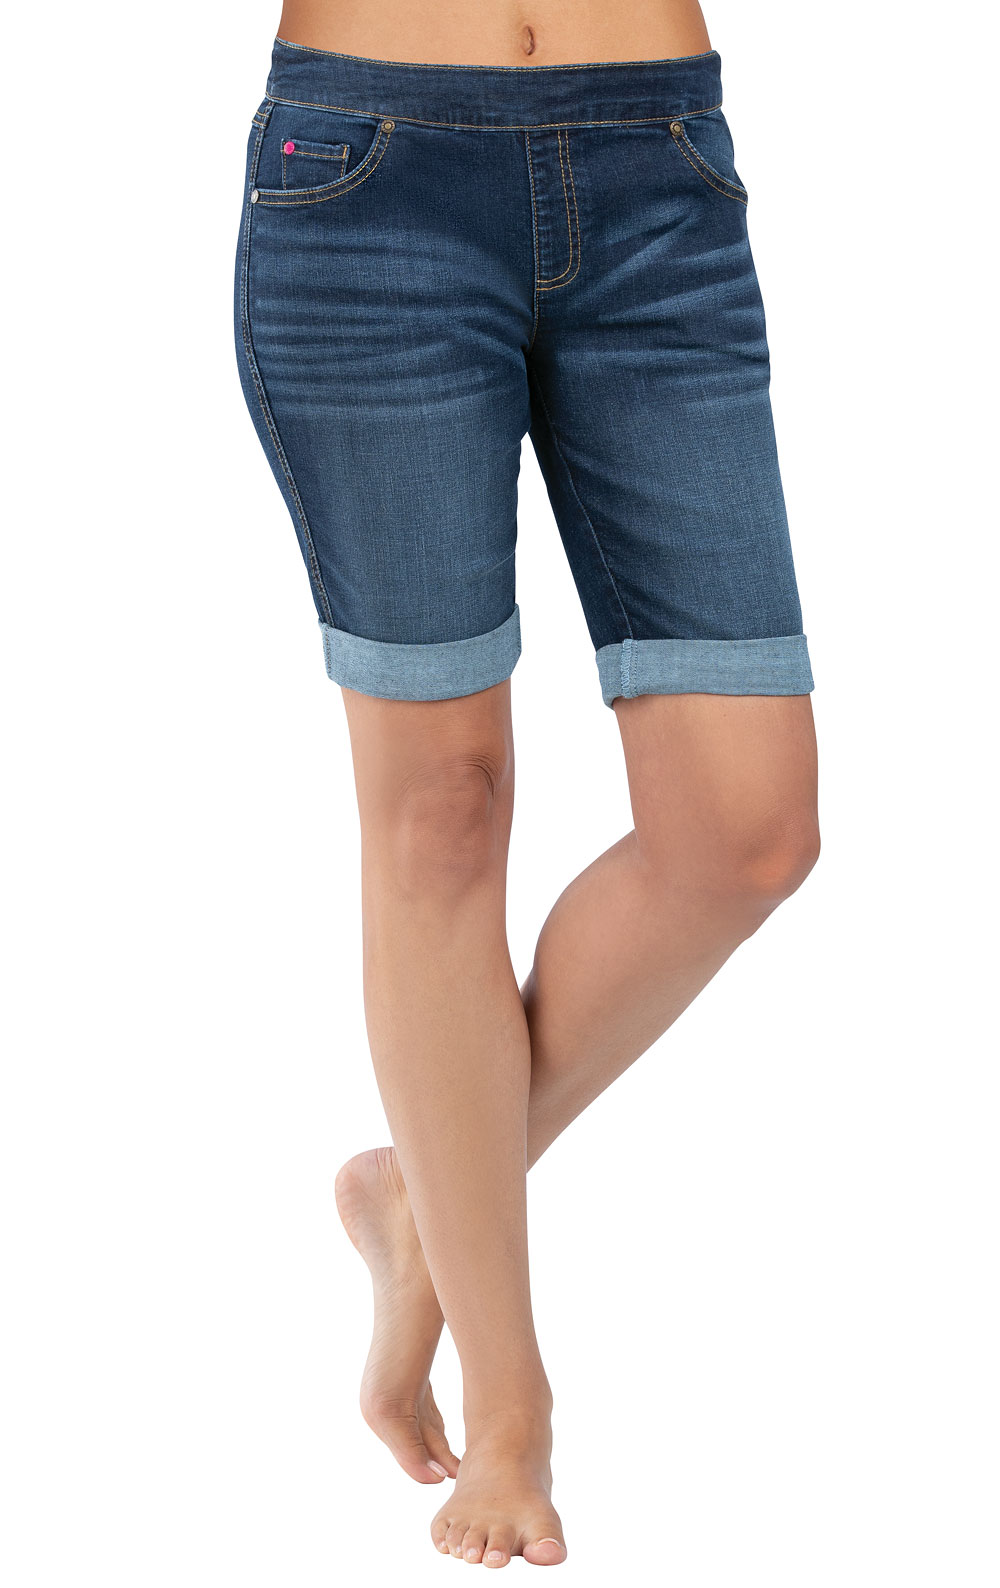 Shorts For Women Over 50 - A Well Styled Life®